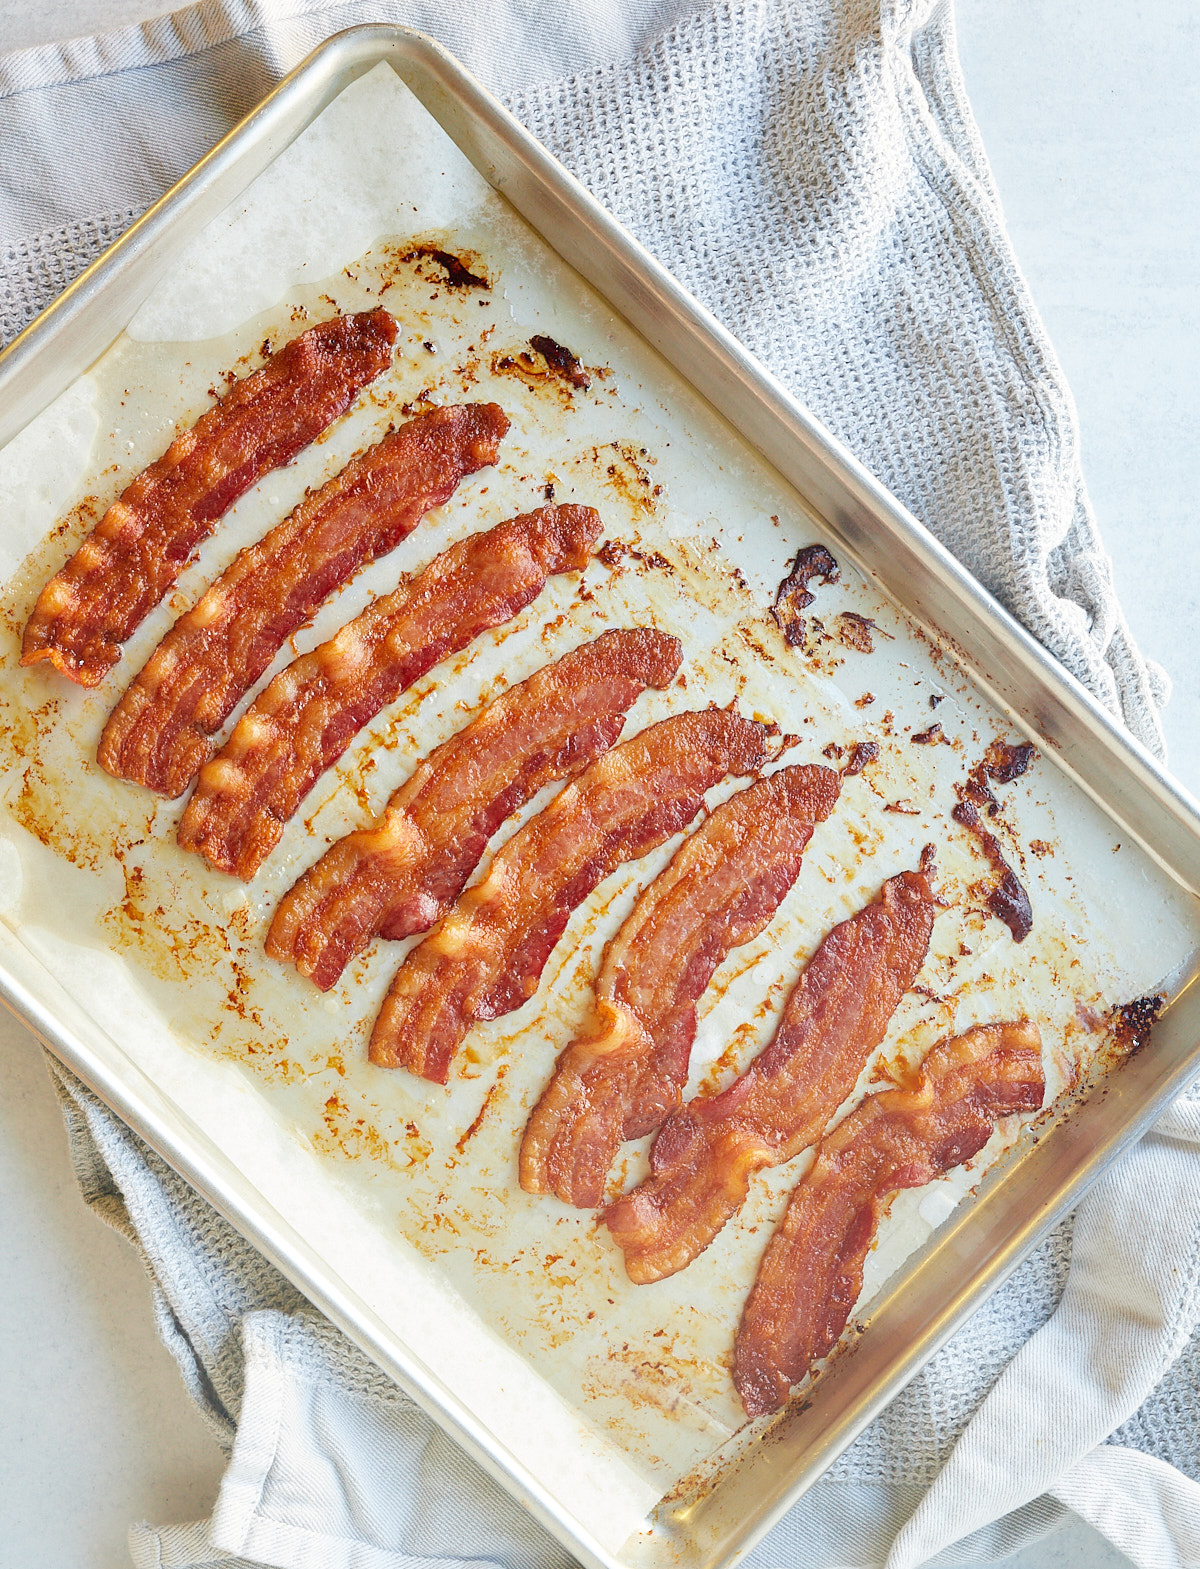 Strips of oven baked crispy bacon on a baking sheet.